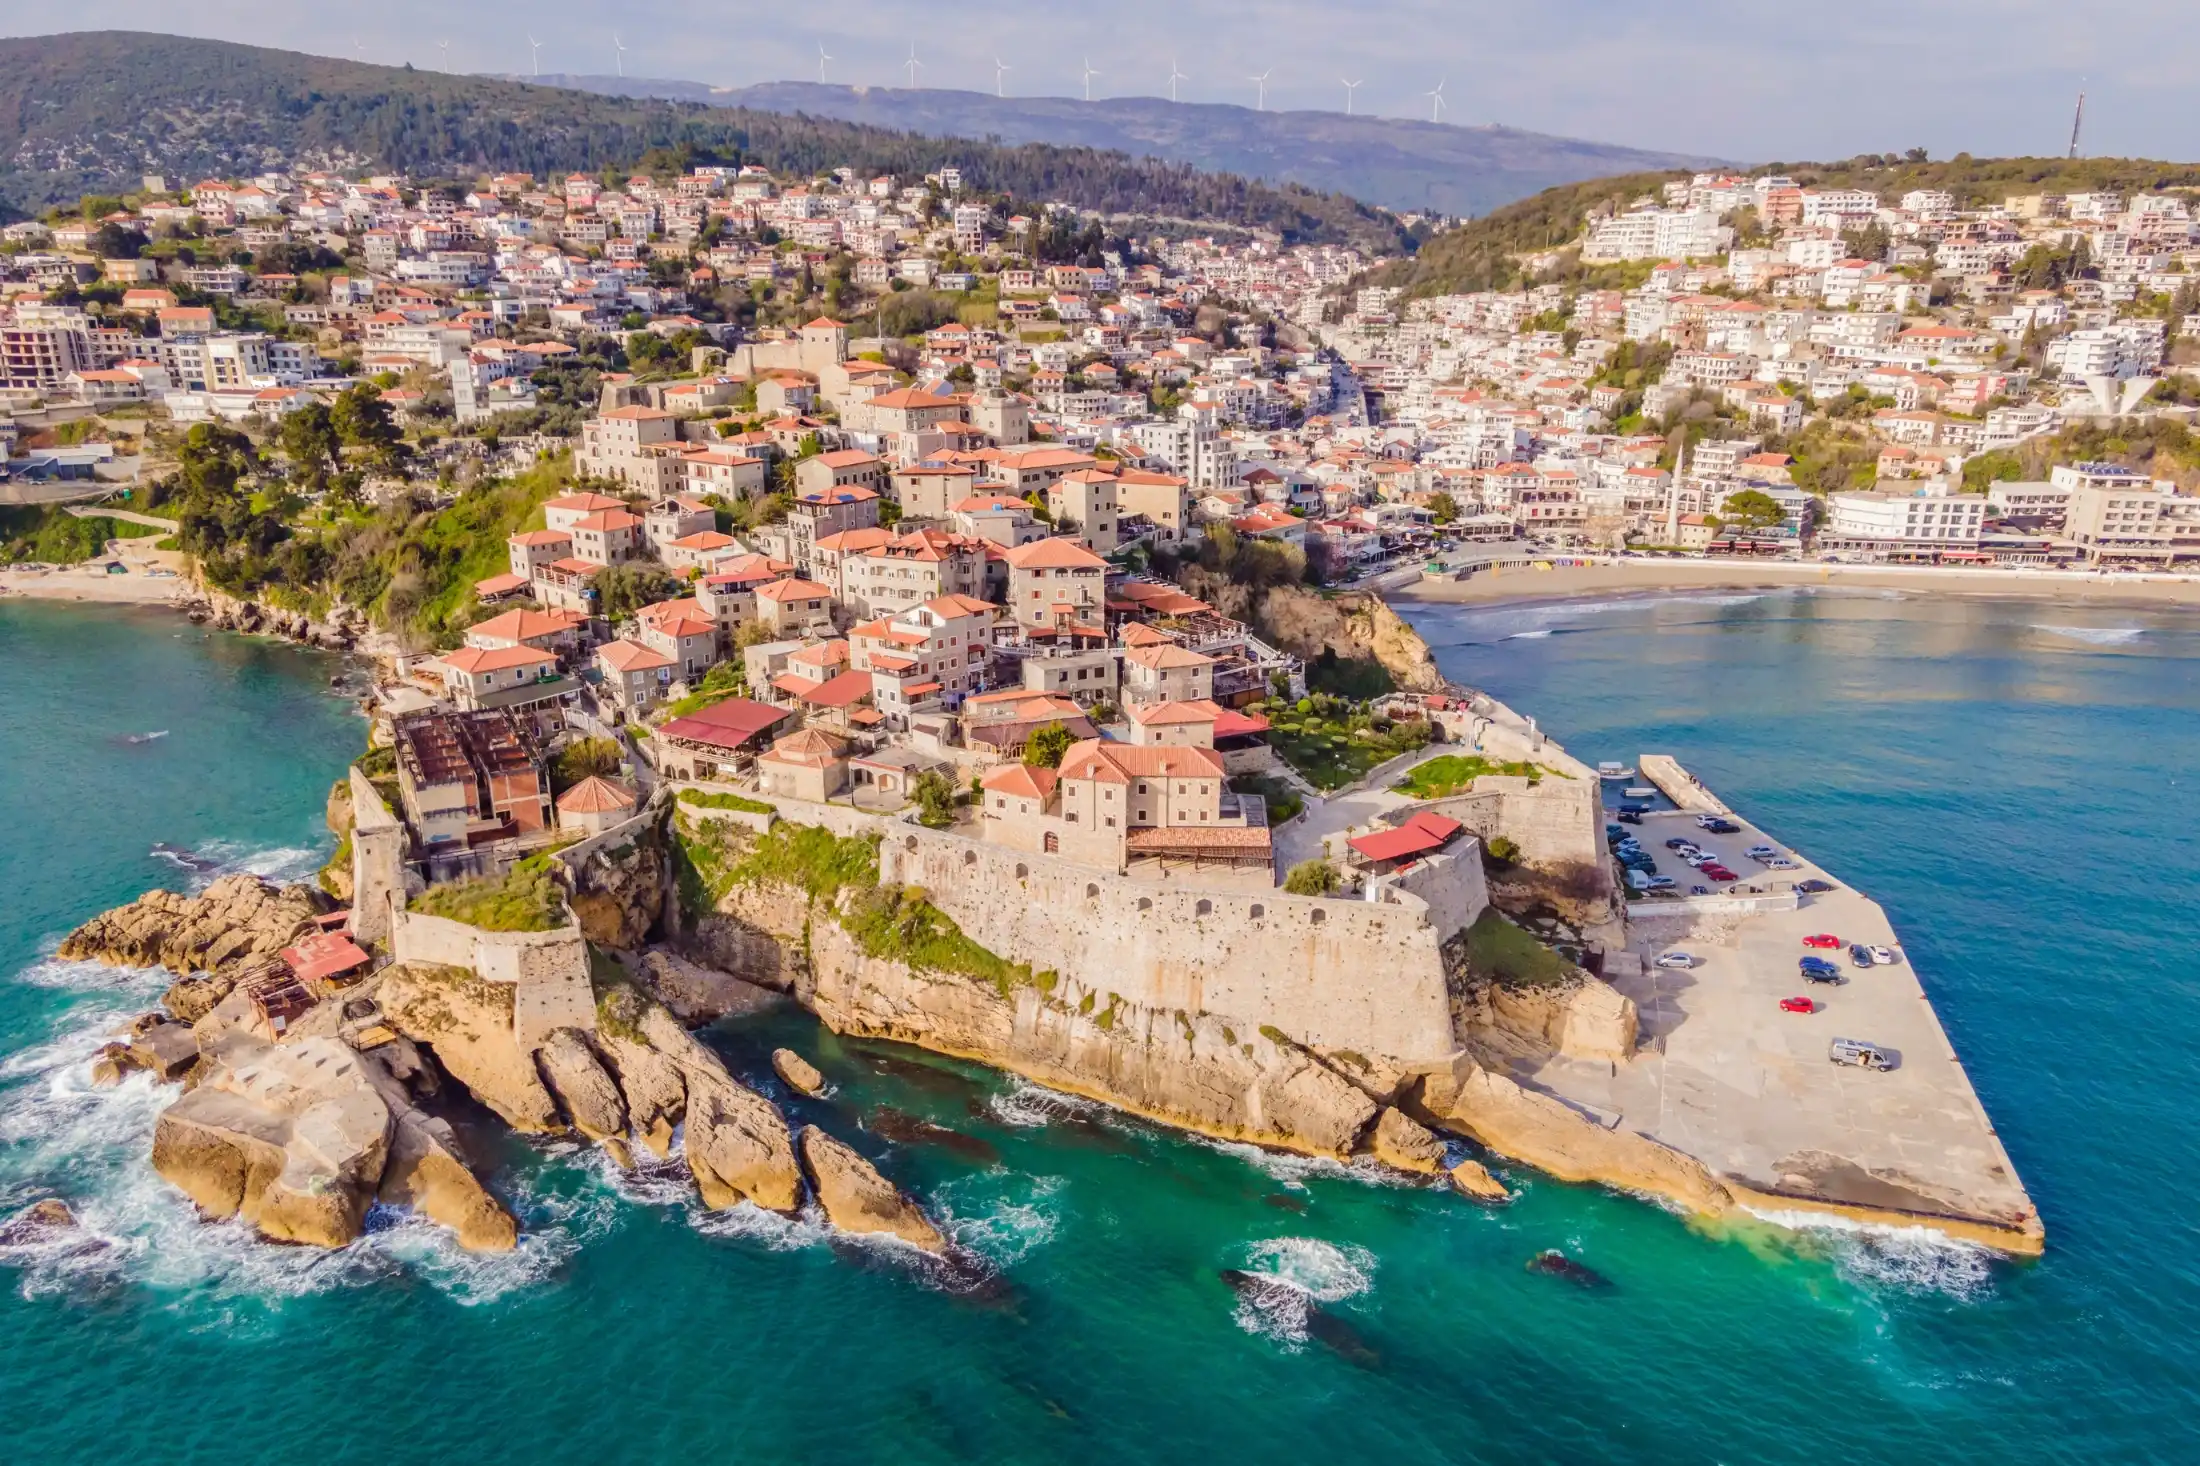 Aerial View of Ulcinj’s Old Town and its red-roofed buildings